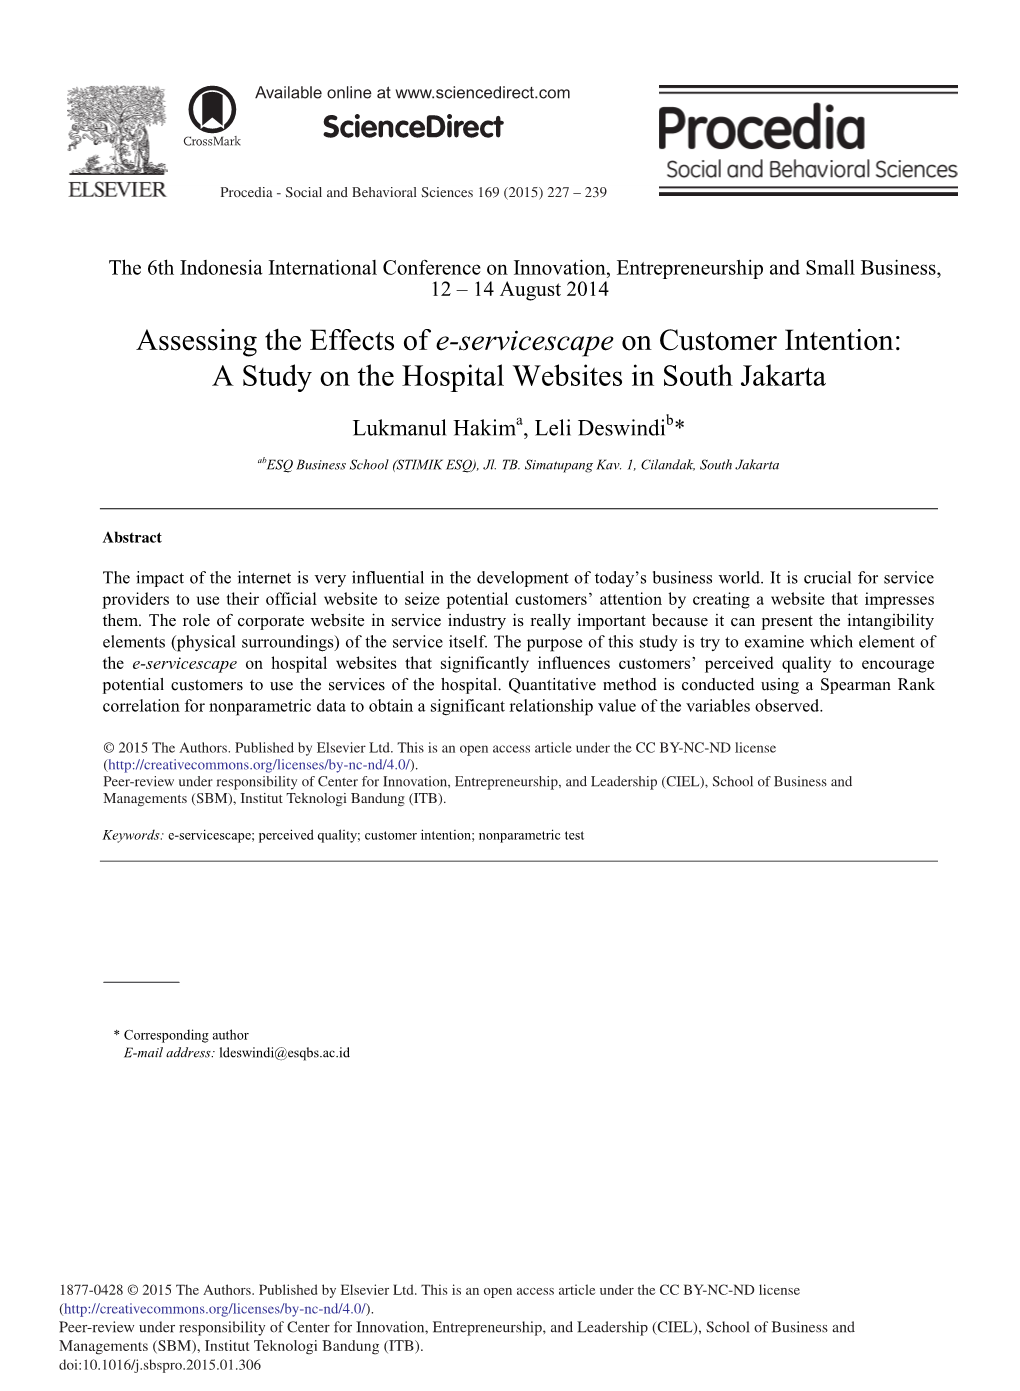 Assessing the Effects of E-Servicescape on Customer Intention: a Study on the Hospital Websites in South Jakarta